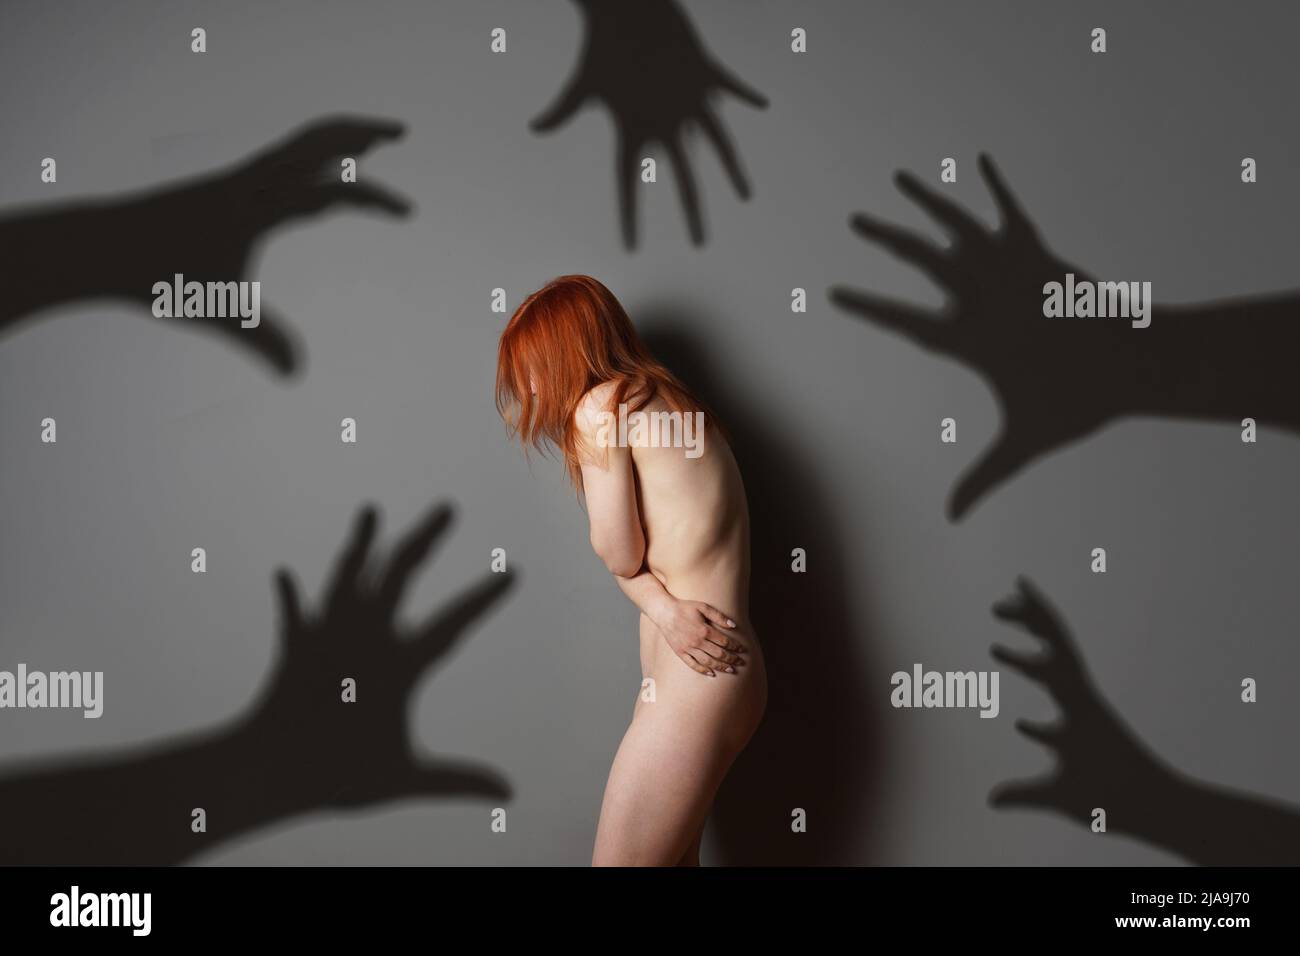 sexual harassment or abuse concept with naked woman shadows of grabbing hands Stock Photo